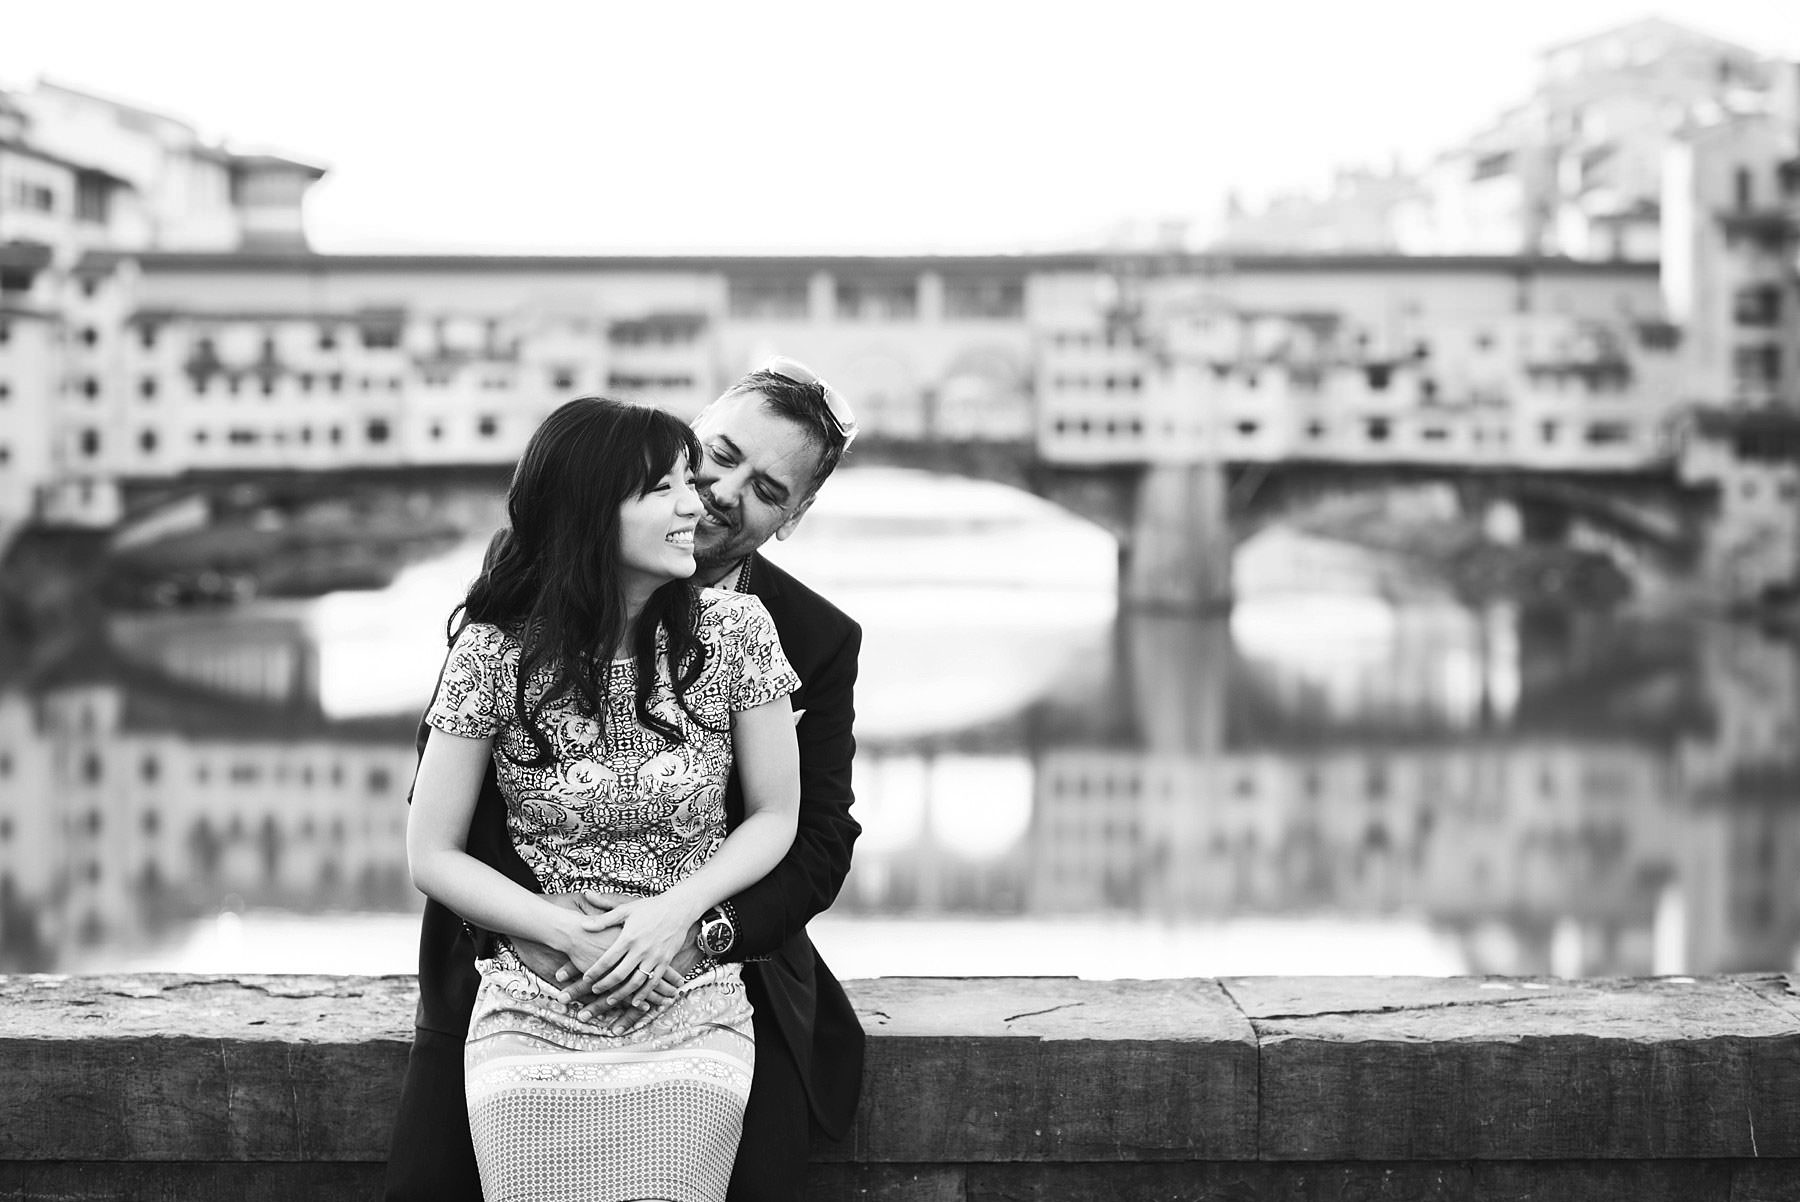 Enjoy the love with a sunrise engagement photo session in Florence and take the opportunity to build your memories with the whole city at your feet